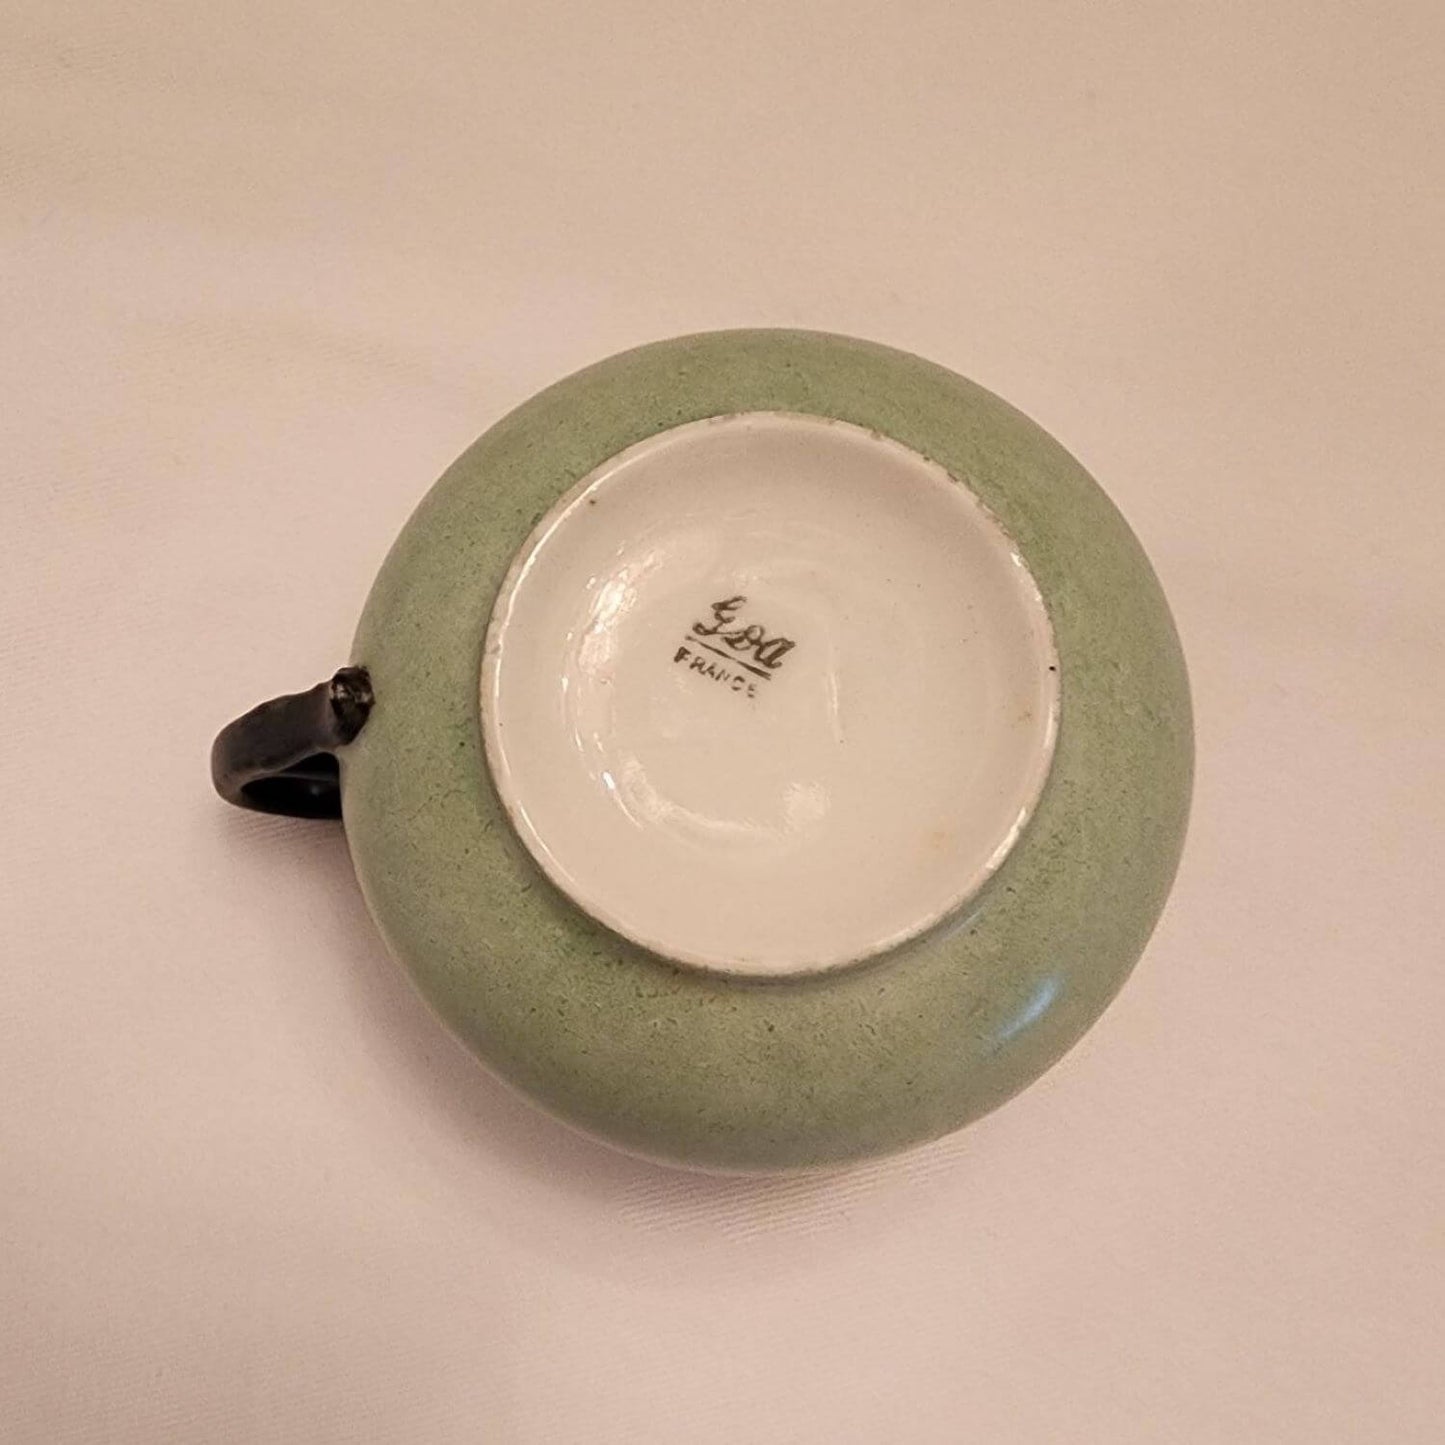 GDA France Green Tea Cup and Saucer Set